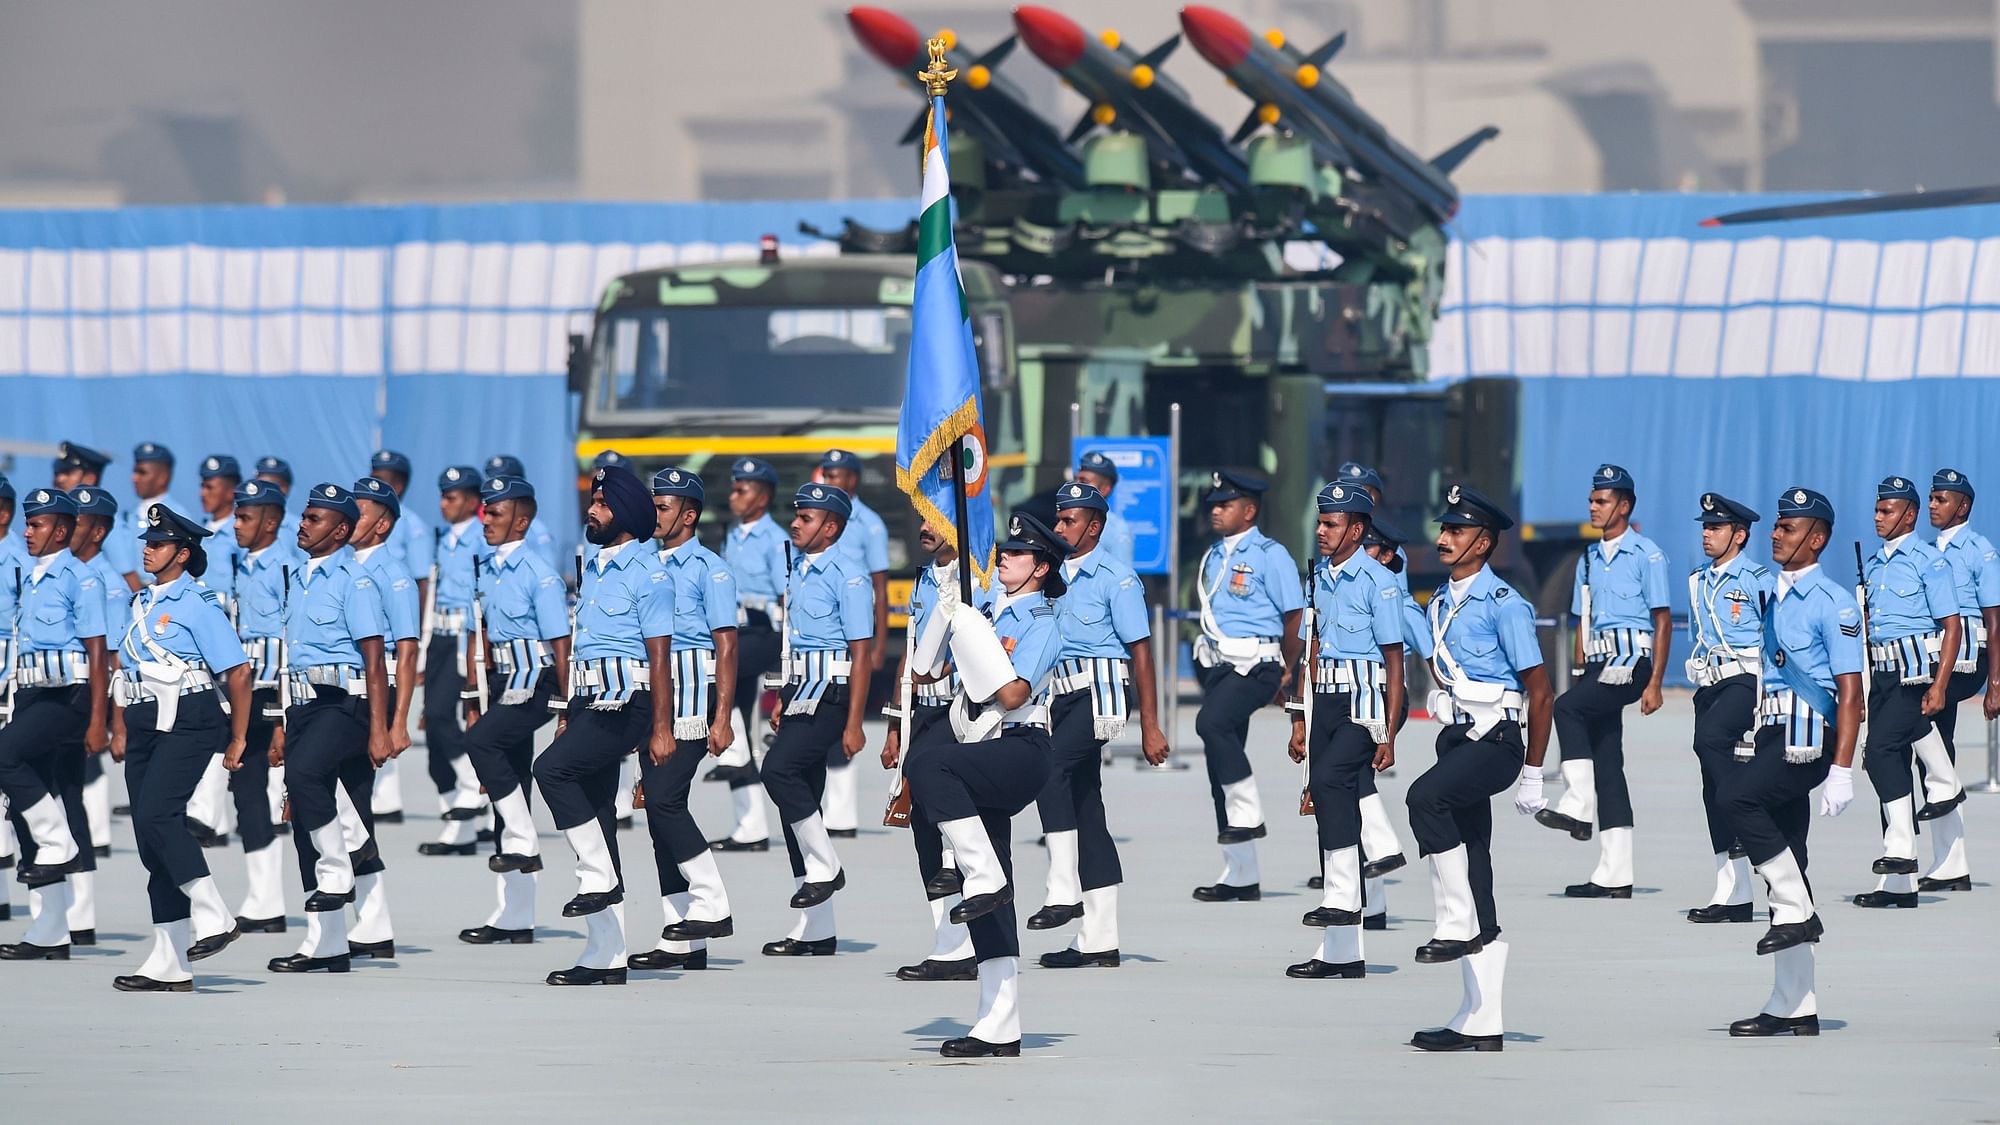 IAF personnel march past during the 88th Air Force Day celebrations at Hindon airbase in Ghaziabad.